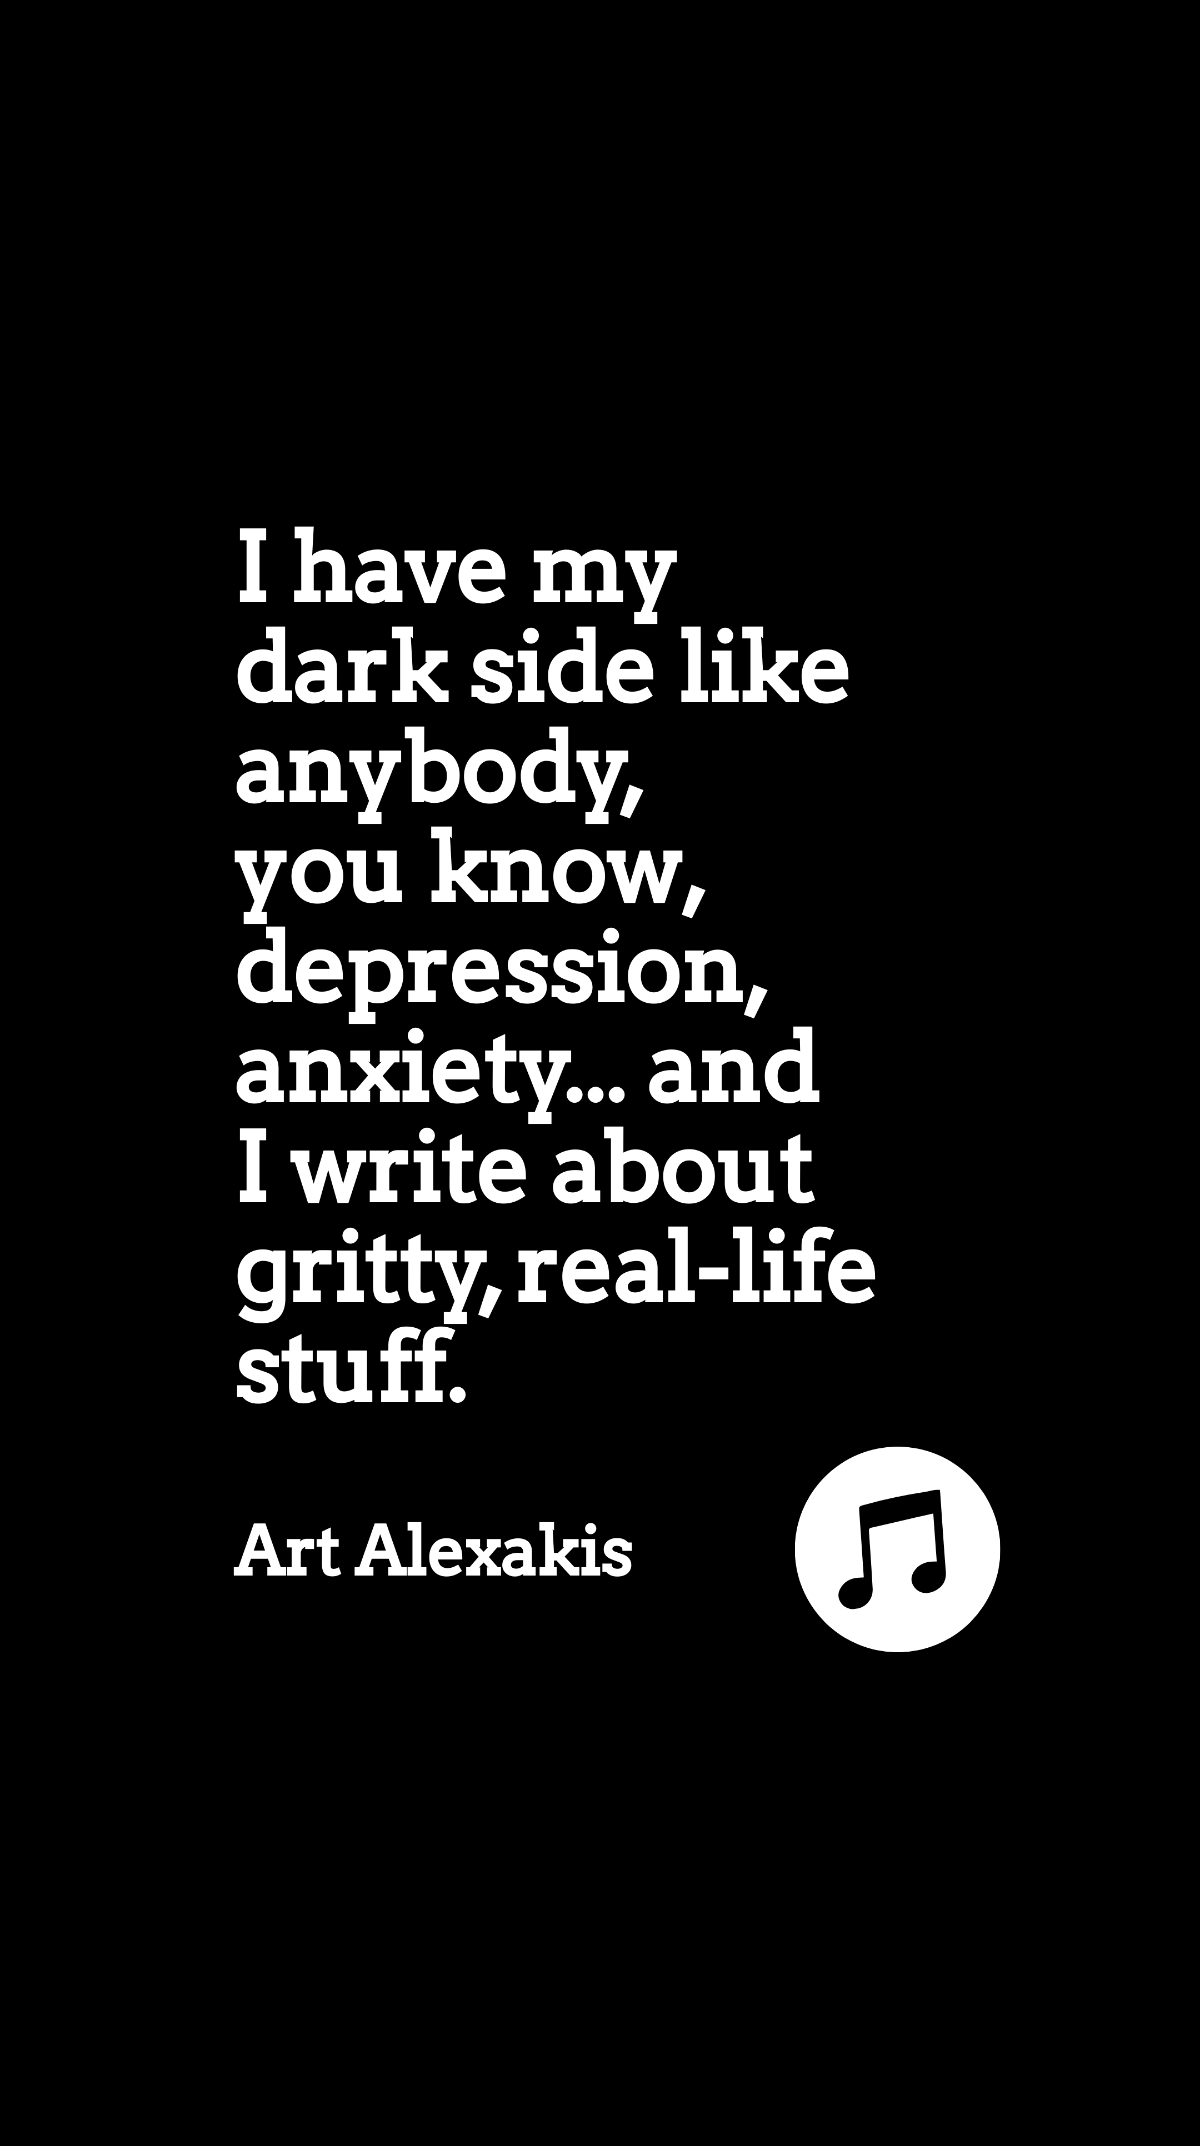 Art Alexakis - I have my dark side like anybody, you know, depression, anxiety... and I write about gritty, real-life stuff.